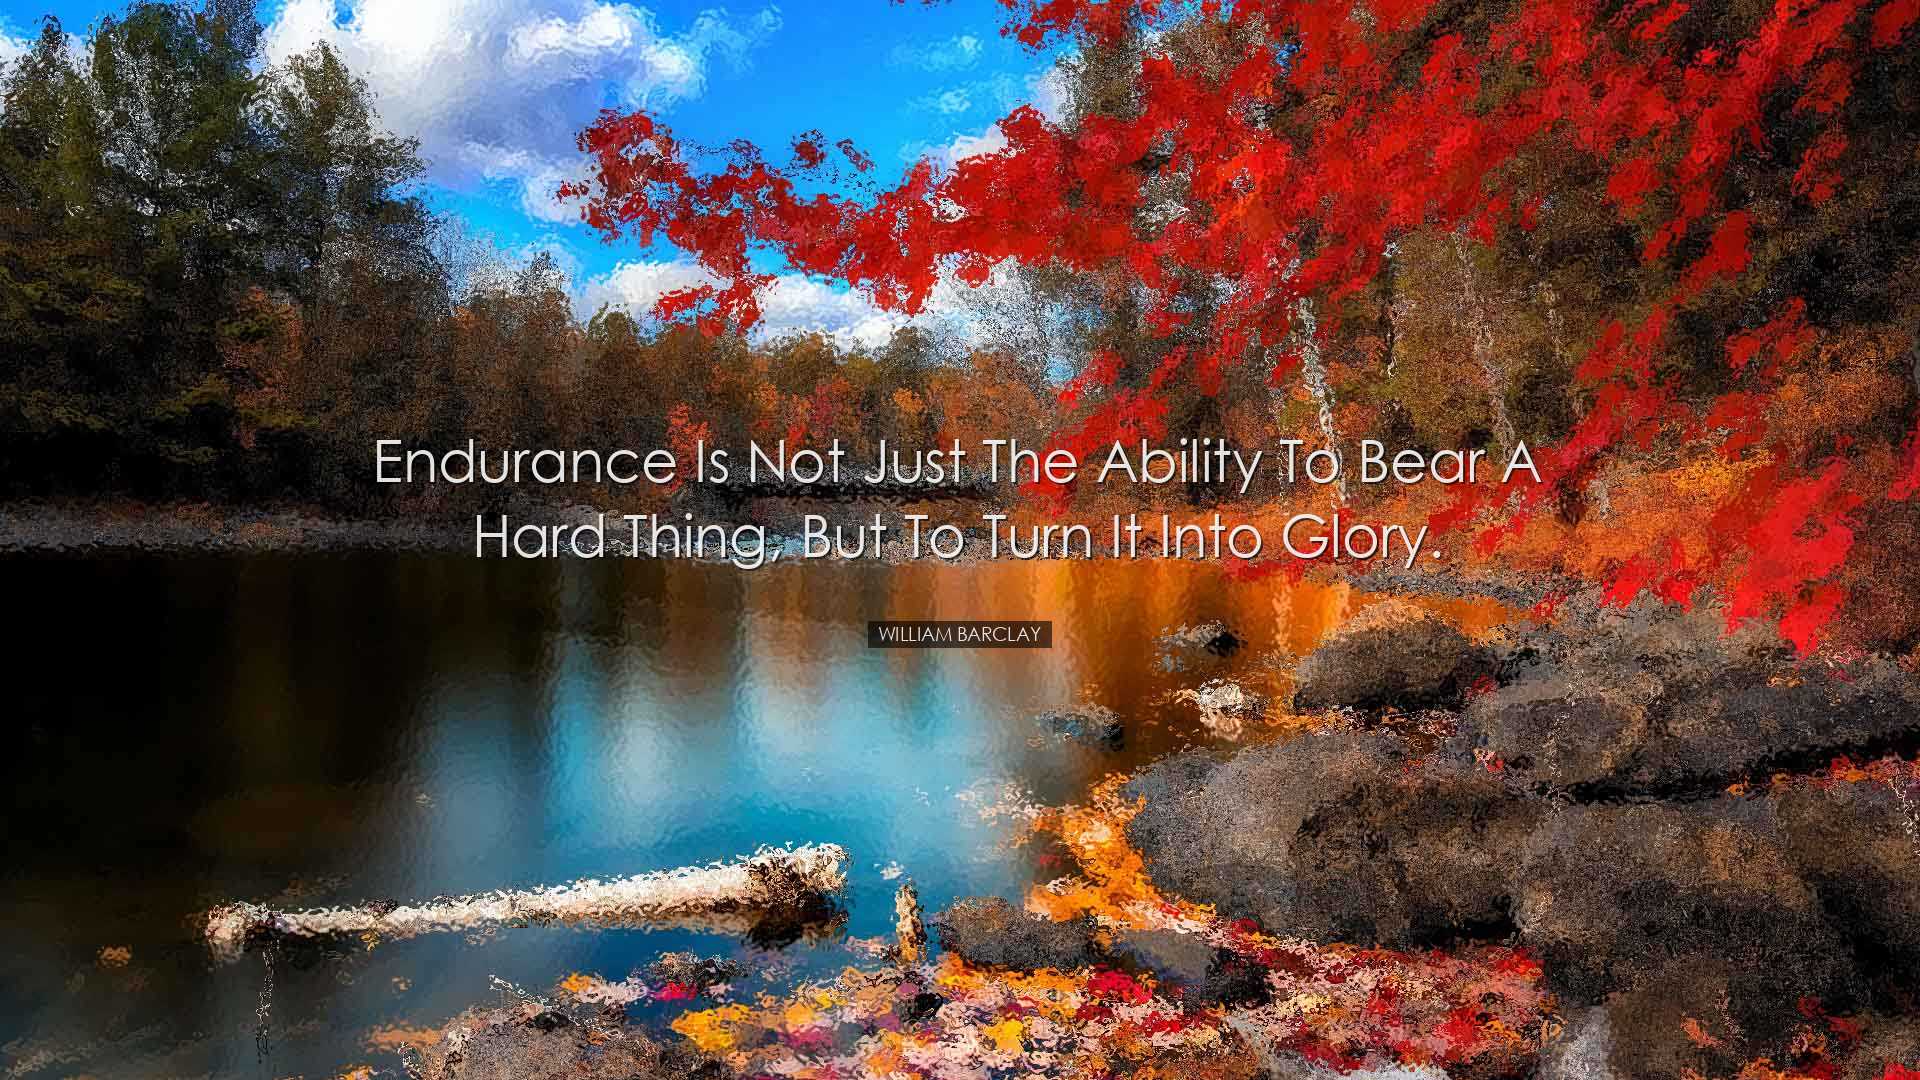 Endurance is not just the ability to bear a hard thing, but to tur